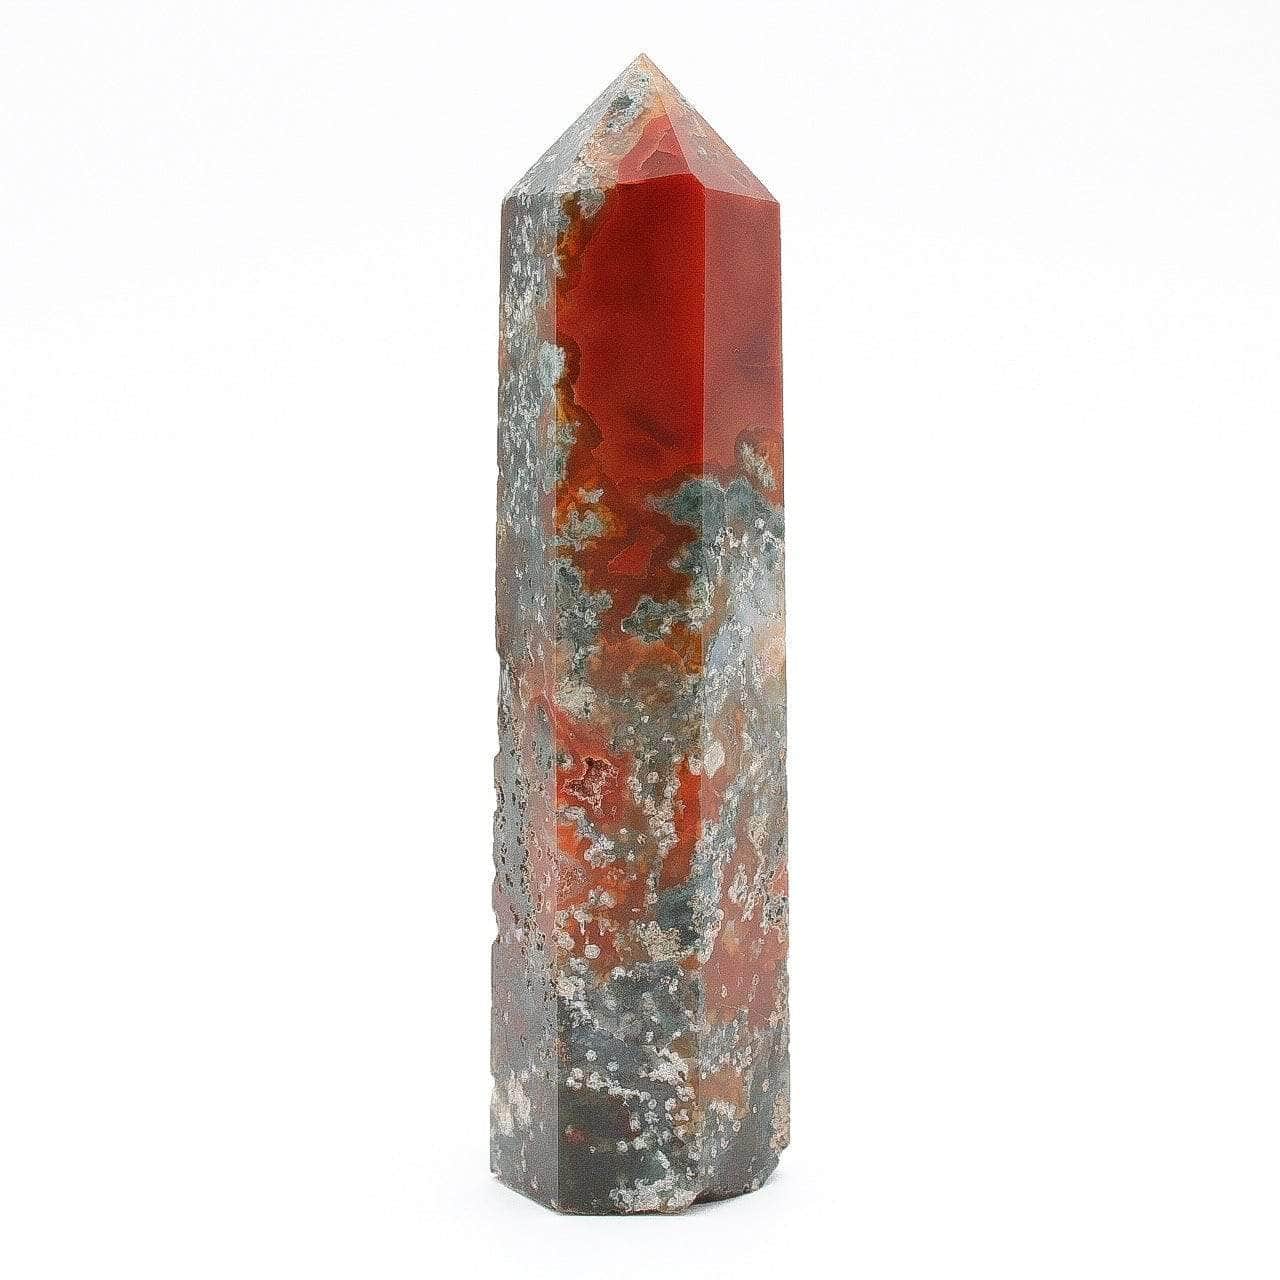 6-11 Crystals Crystal Red Moss Agate Tower (ma-01) 1.75" x 6.5"